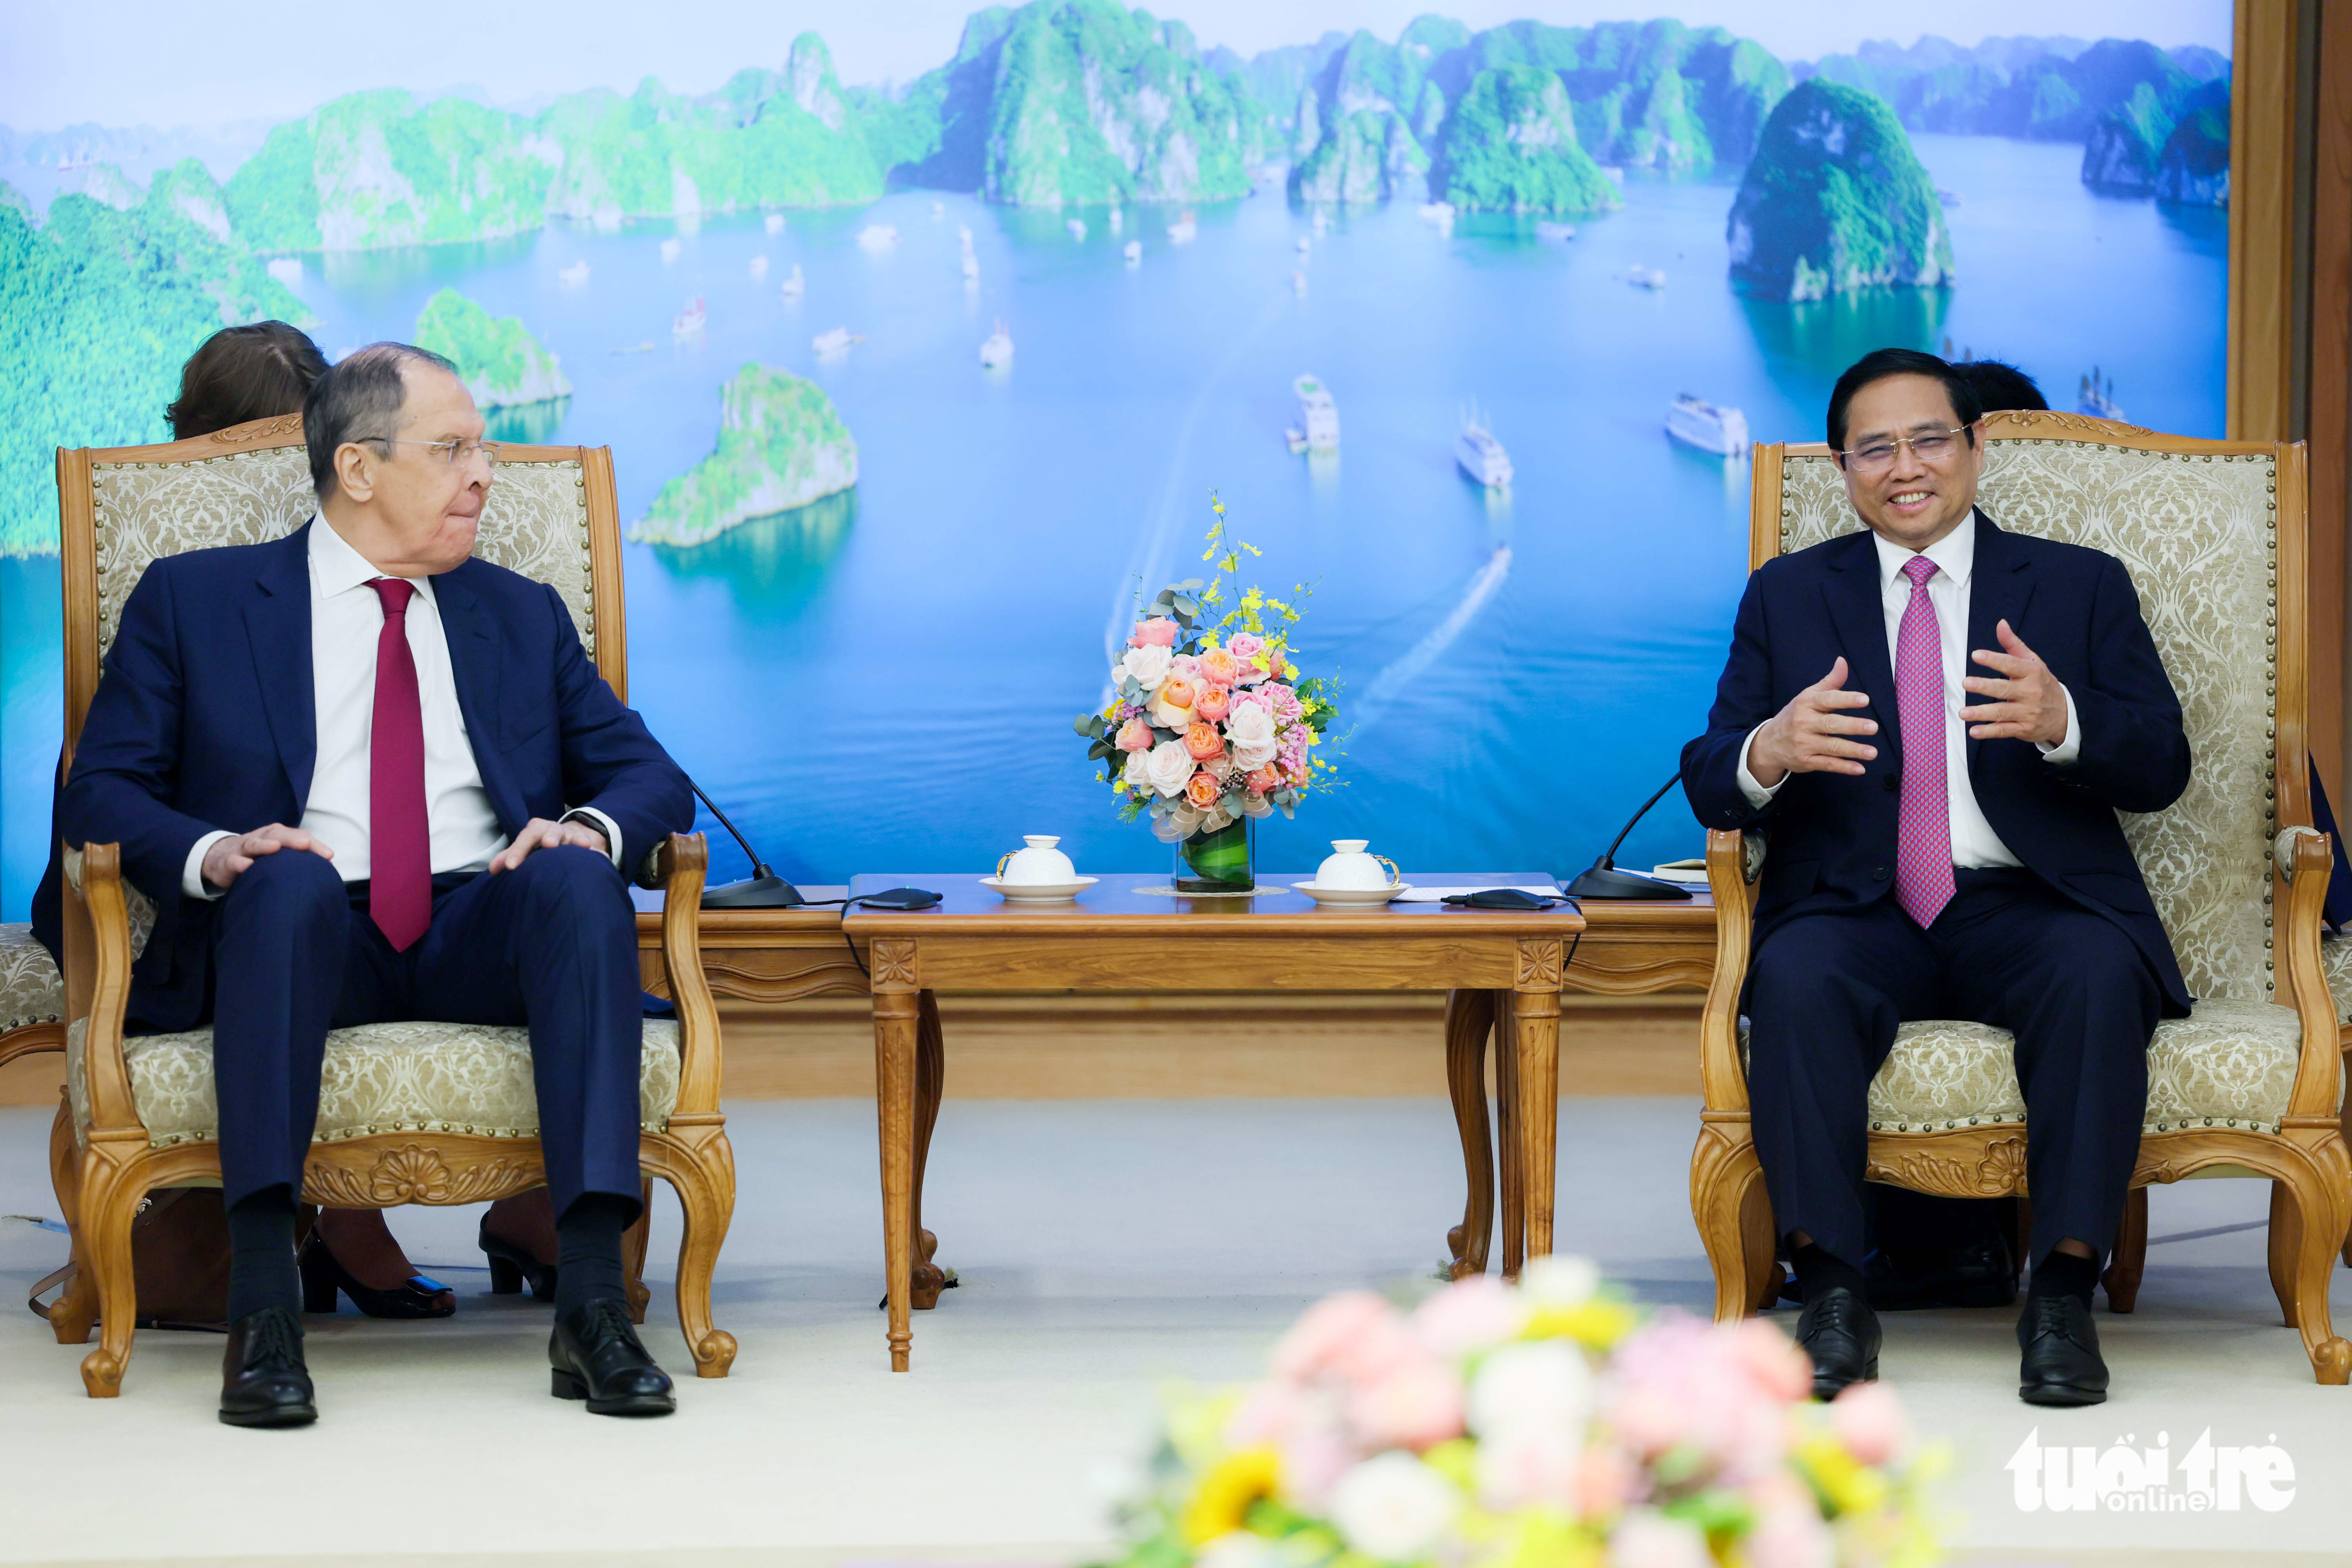 Vietnamese Prime Minister Pham Minh Chinh (R) talks with Russian Minister of Foreign Affairs Sergey Lavrov in Hanoi, July 6, 2022. Photo: Nguyen Khanh / Tuoi Tre